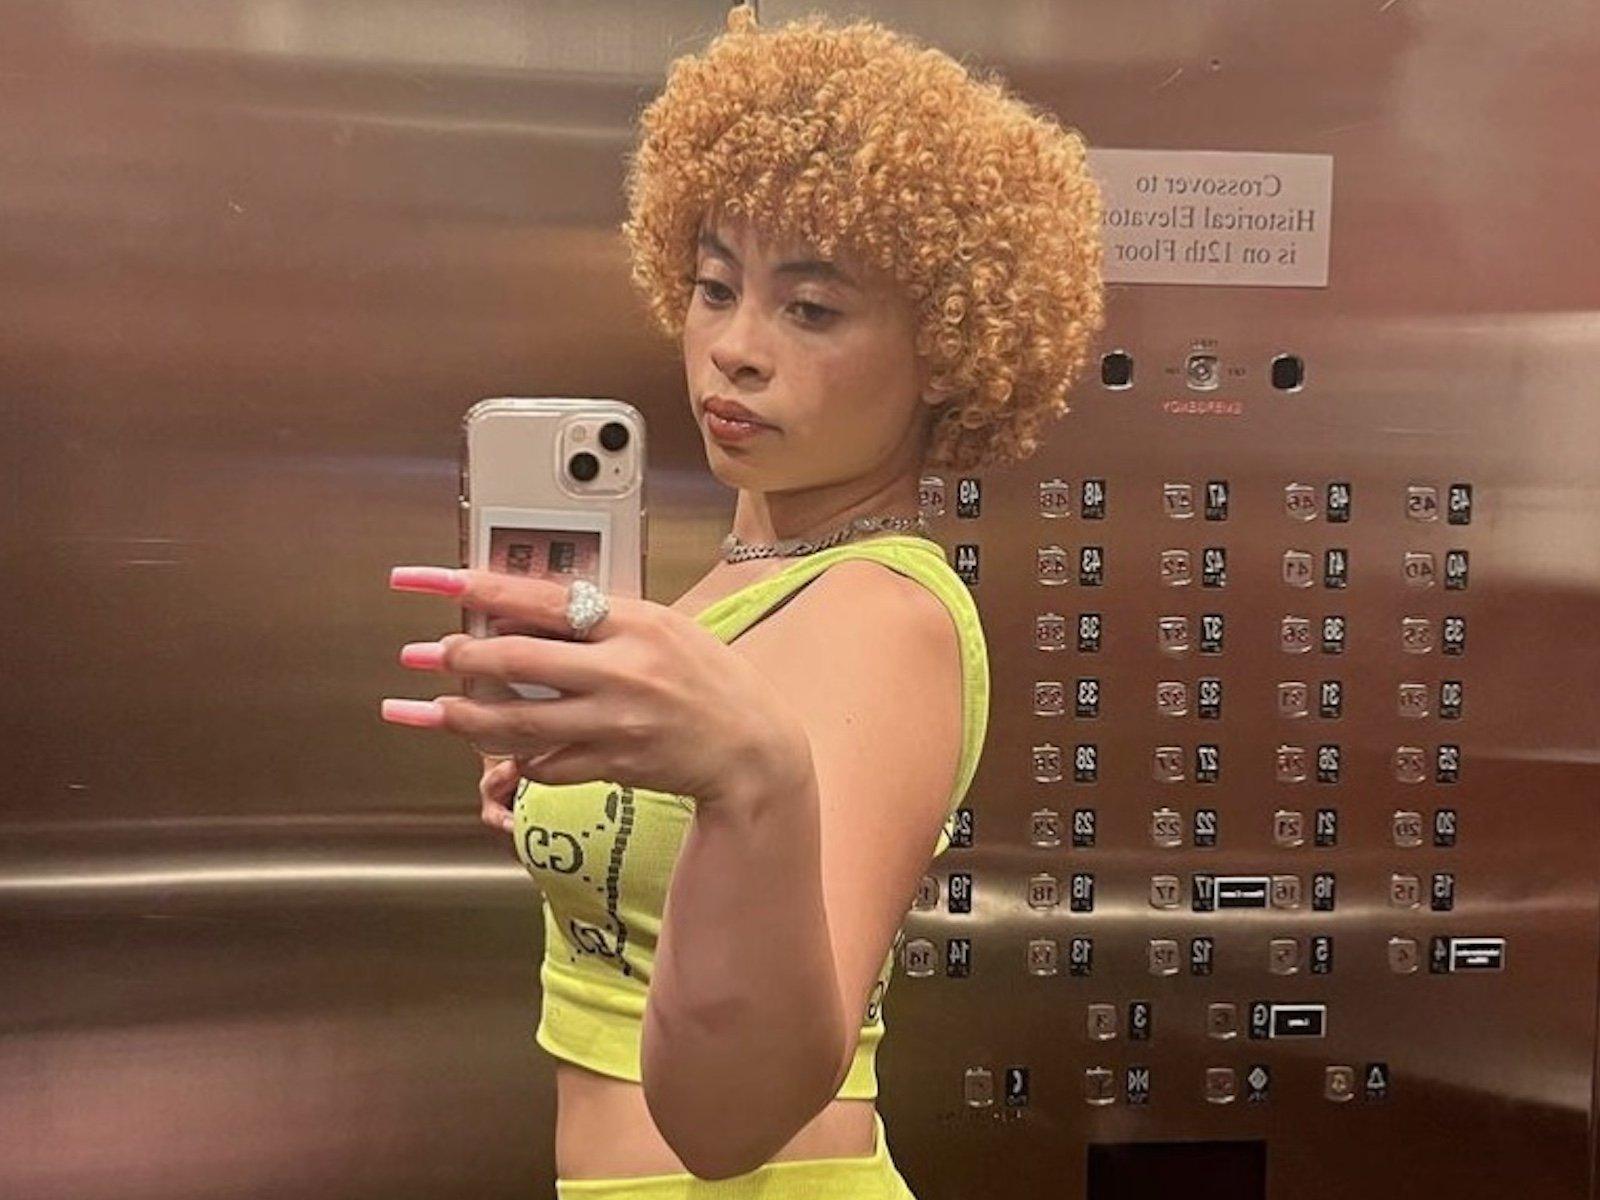 Selfie of a woman with blonde curly hair, wearing a neon green crop top and shorts. - Ice Spice